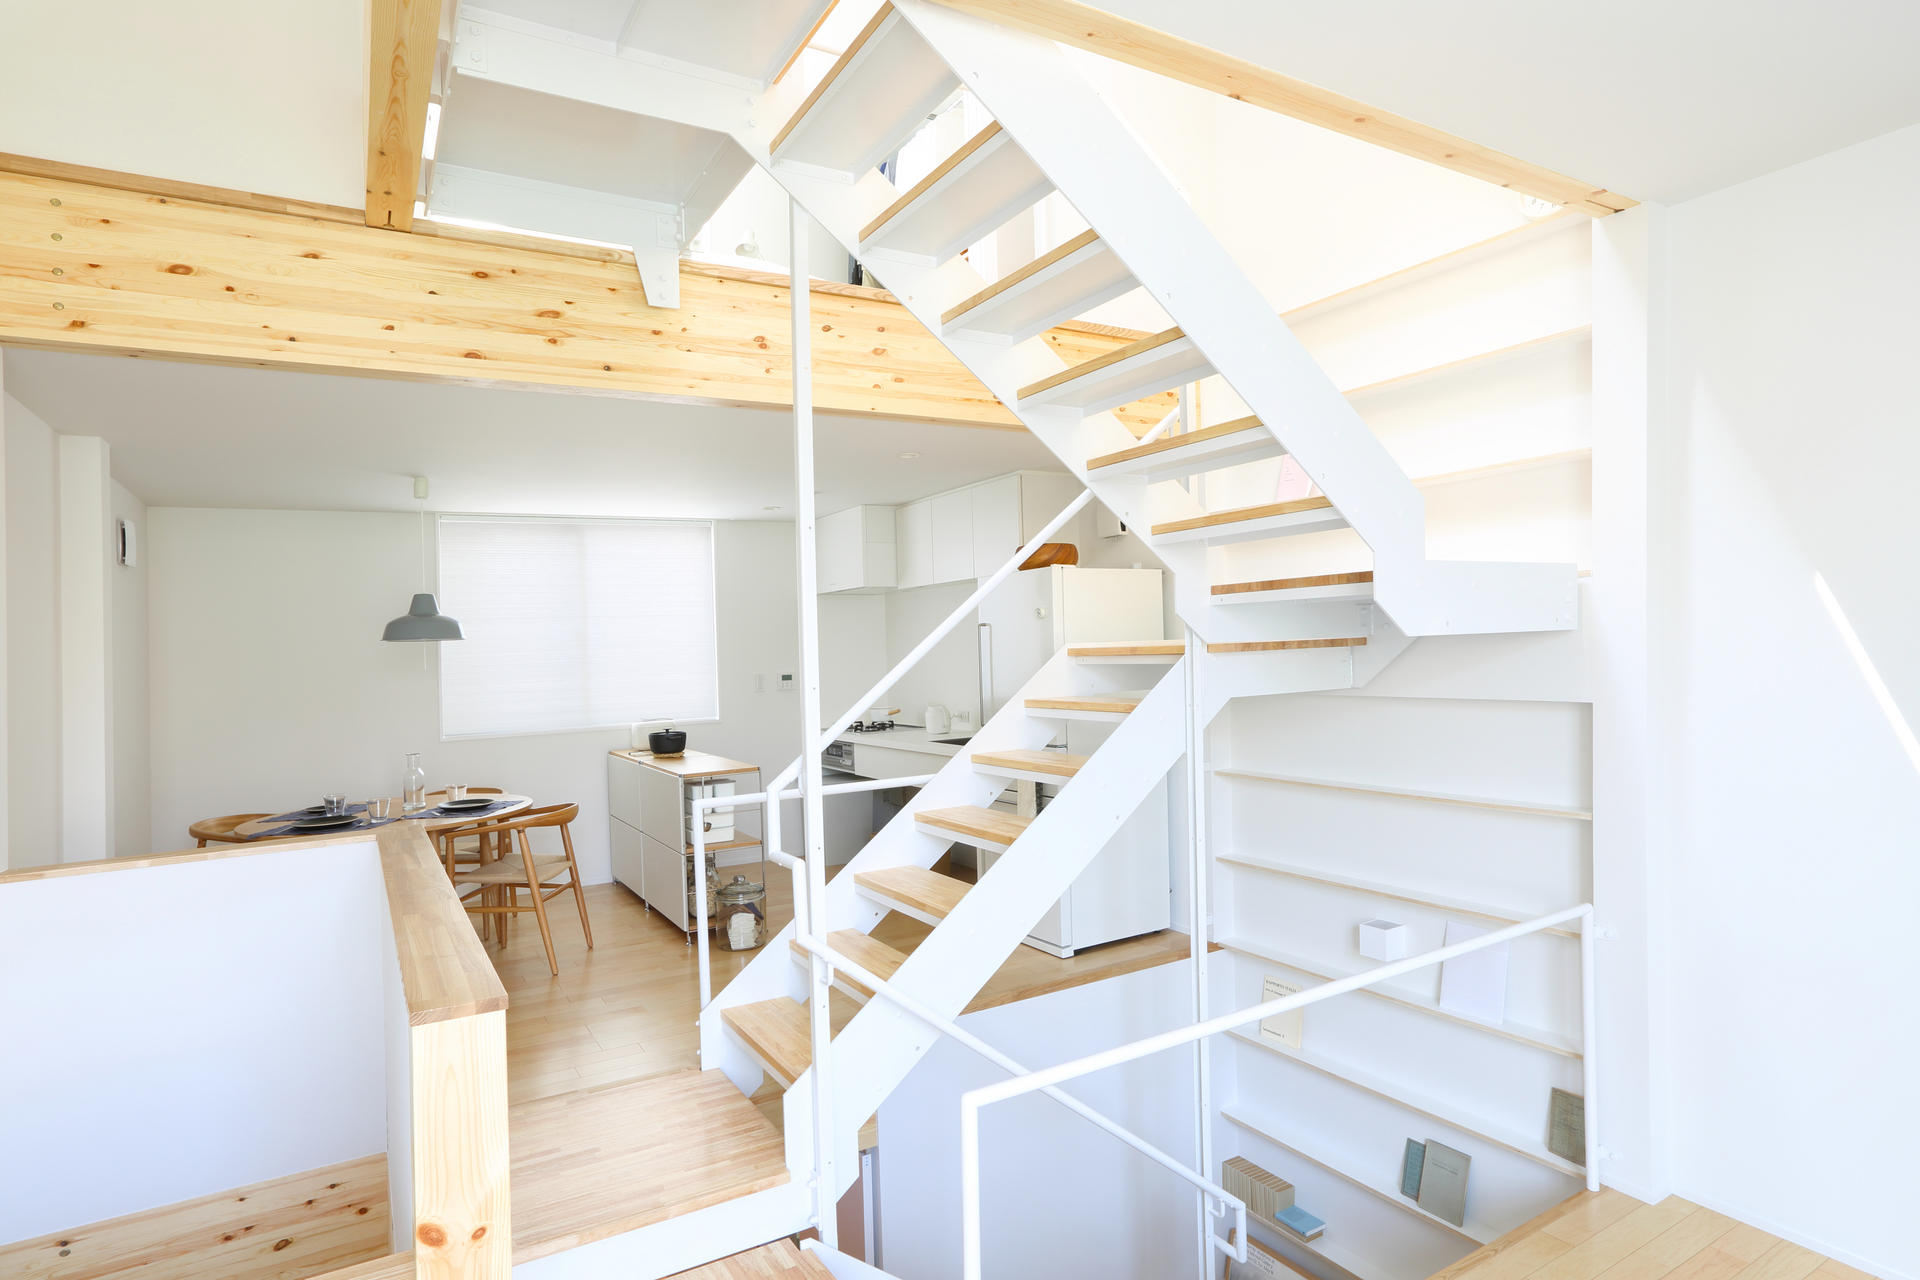 Picture for Features, Interiors. Muji House, for Charmaine Credit: courtesy of Muji Country: Japan